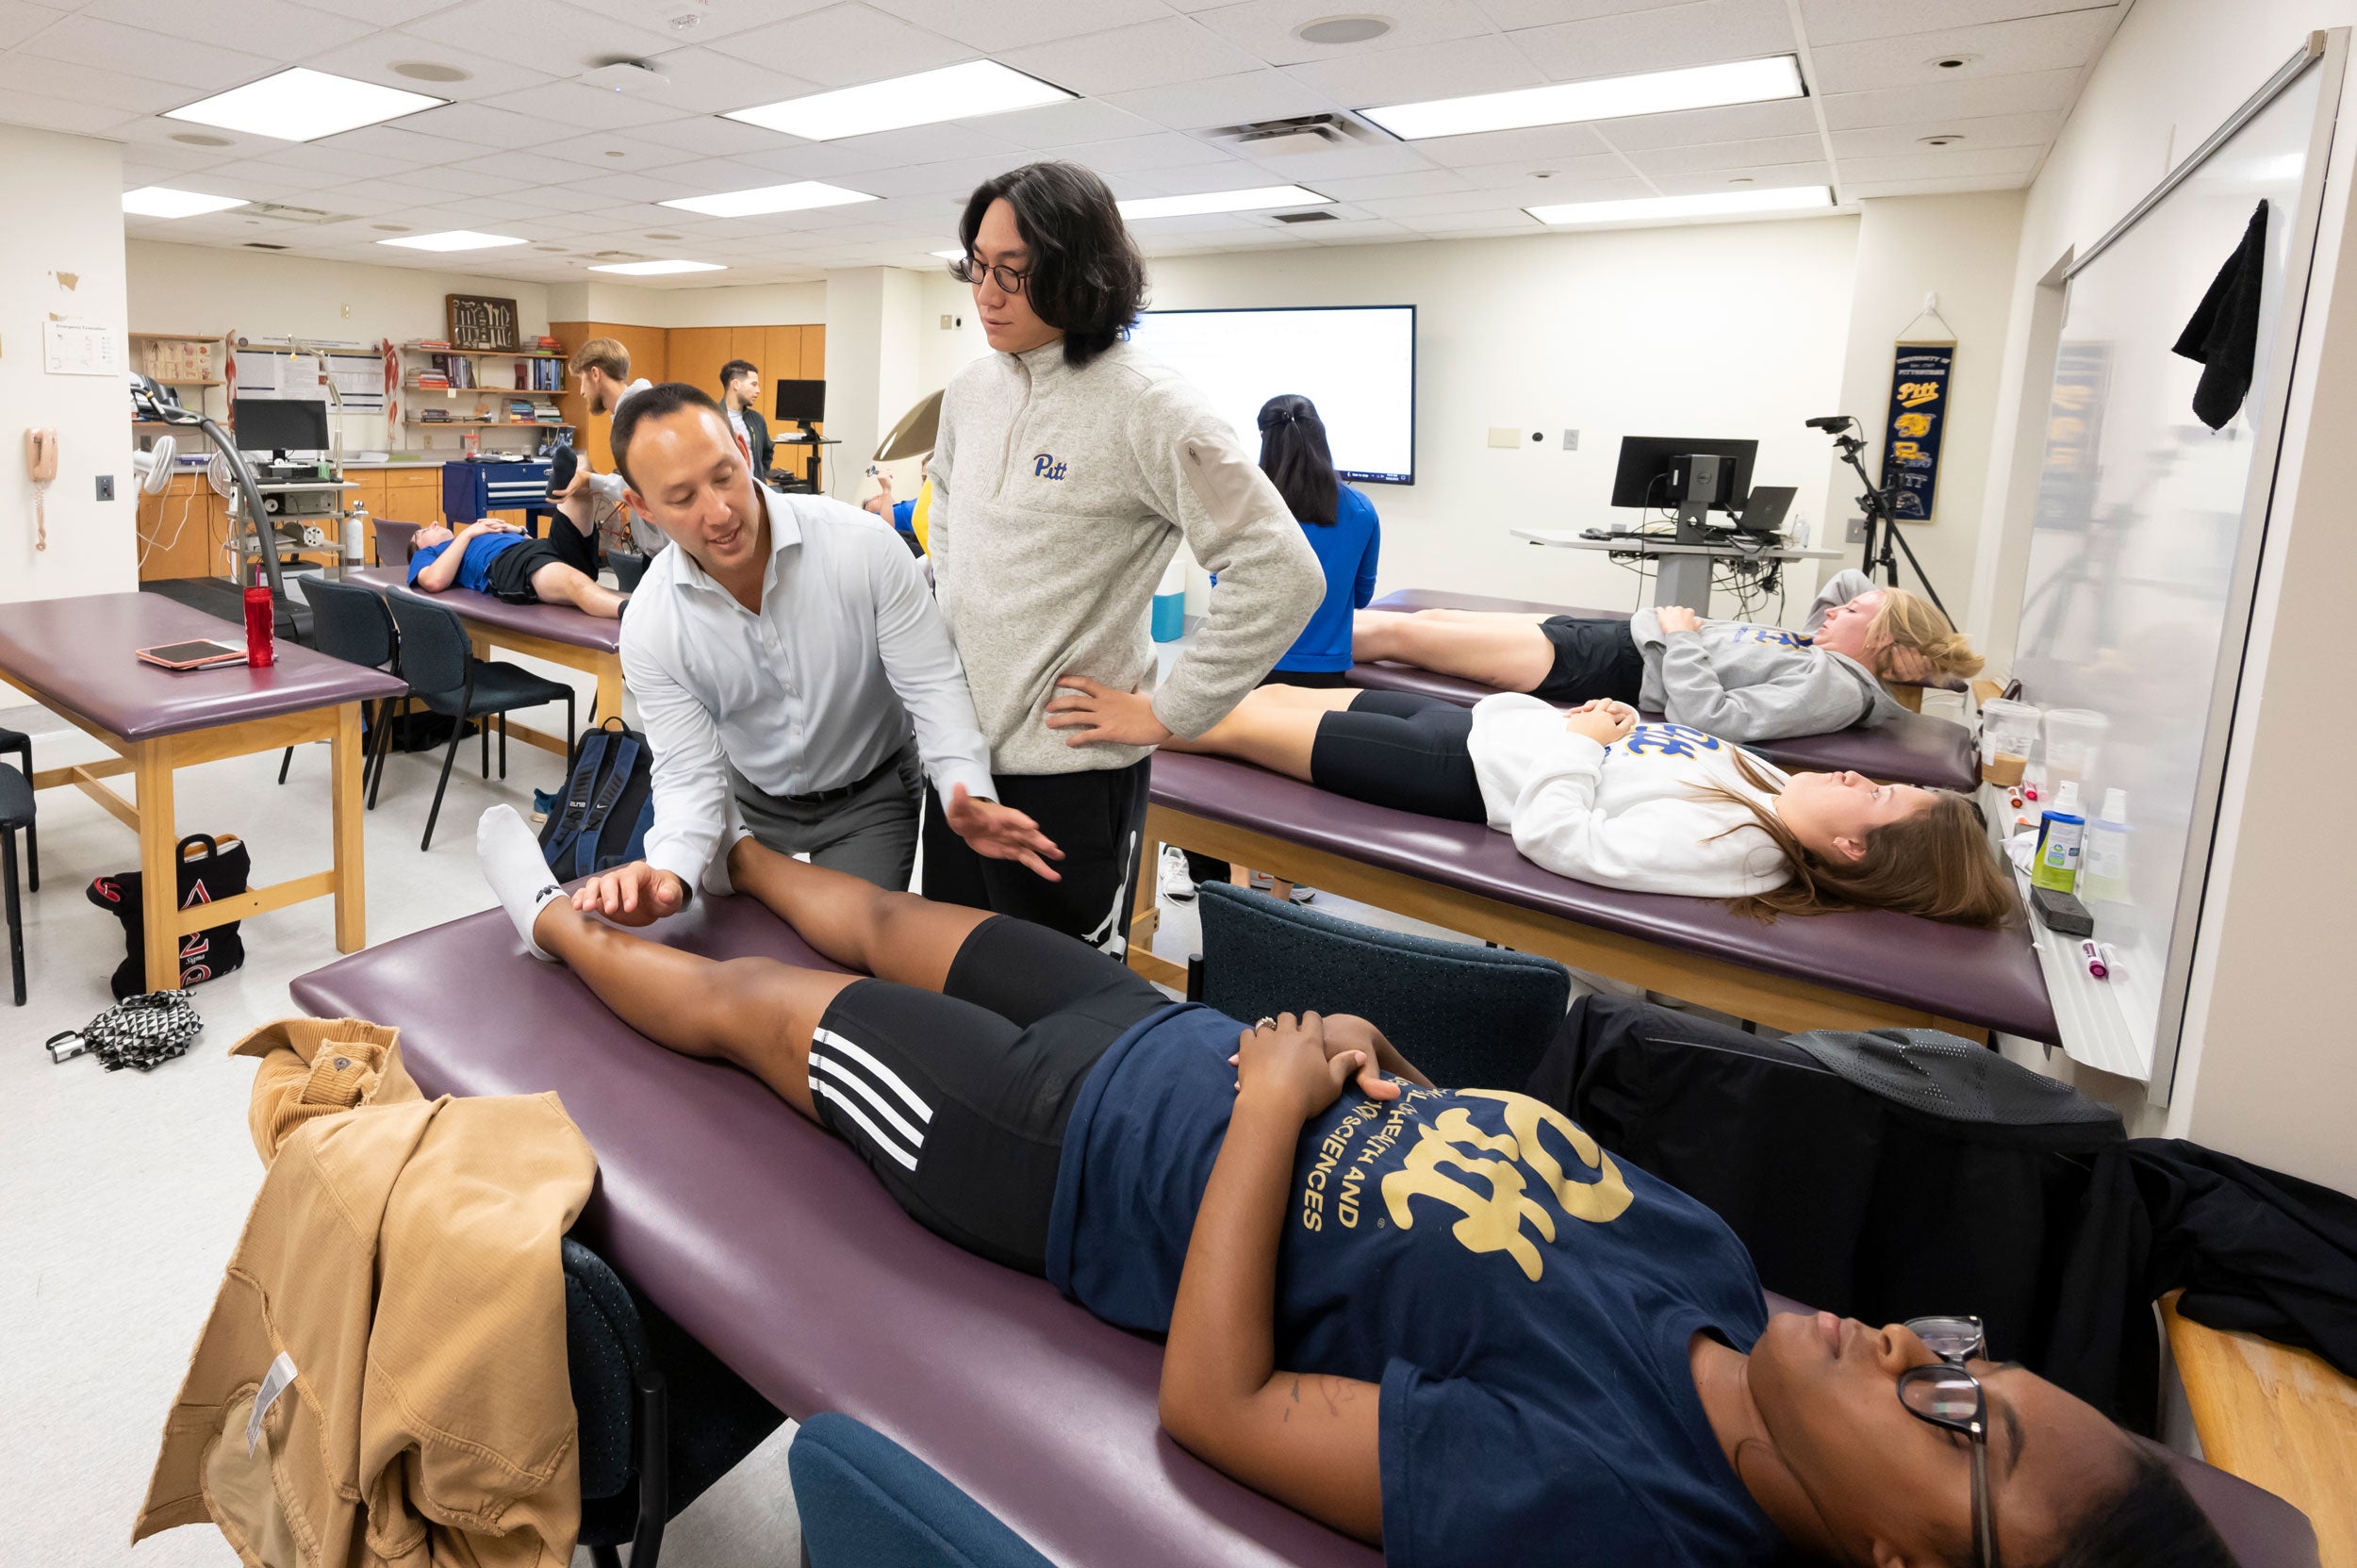 Sports Medicine students learning hands-on techniques from a guest instructor